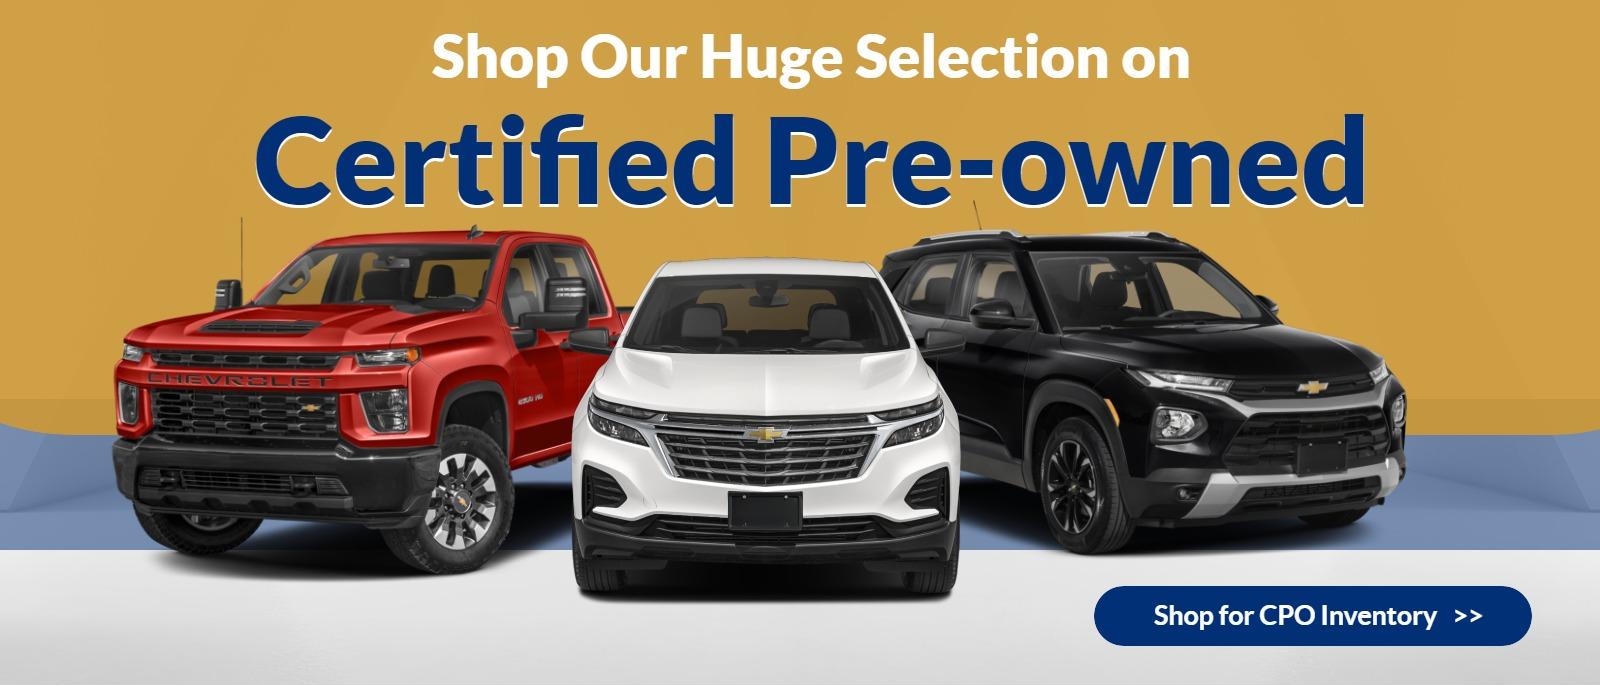 Shop Our Huge Selection on Certified Pre-owned